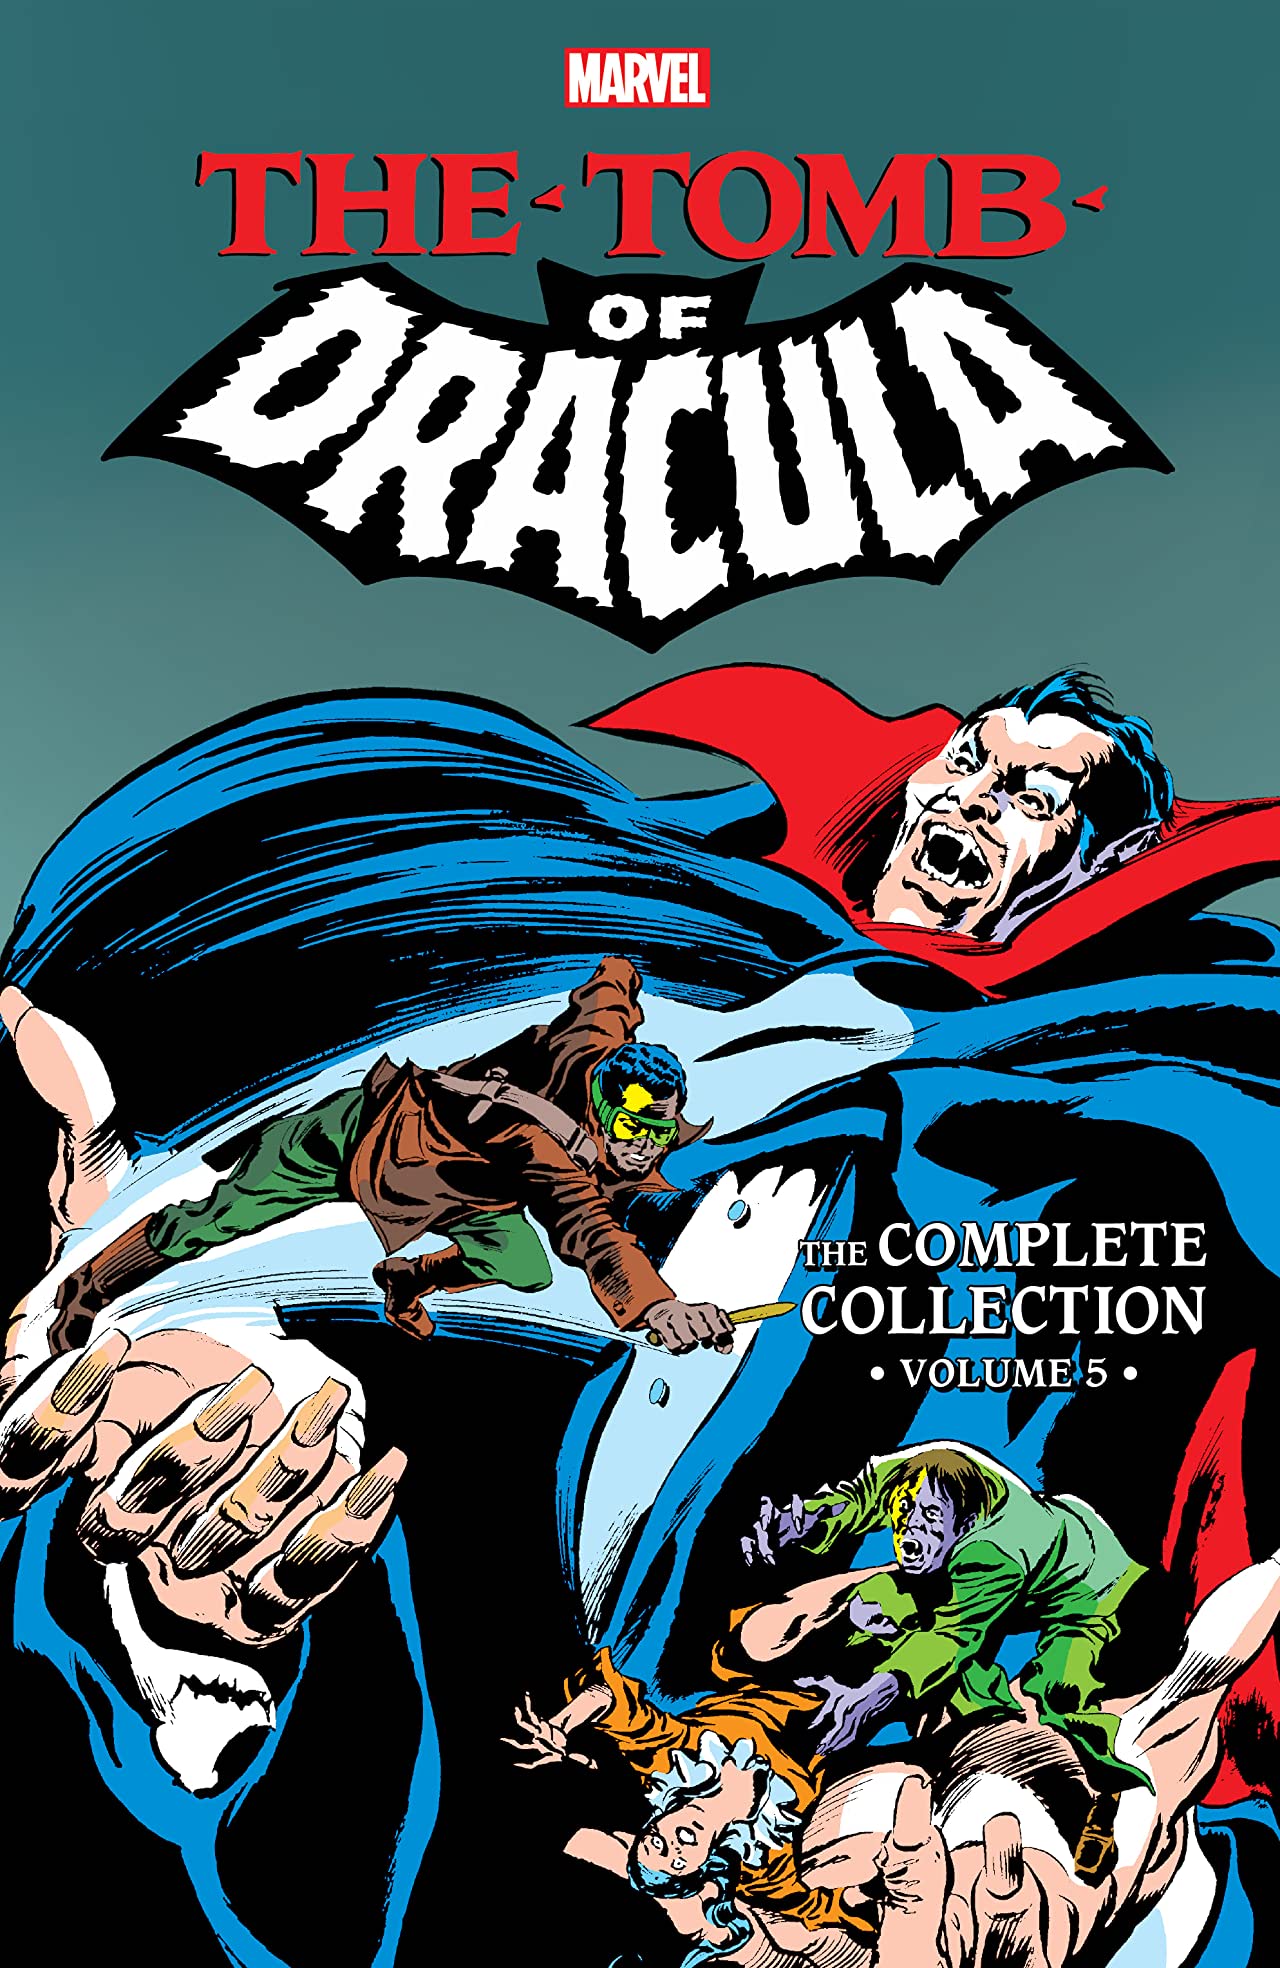 Tomb of Dracula: The Complete Collection Vol. 5 (Trade Paperback)